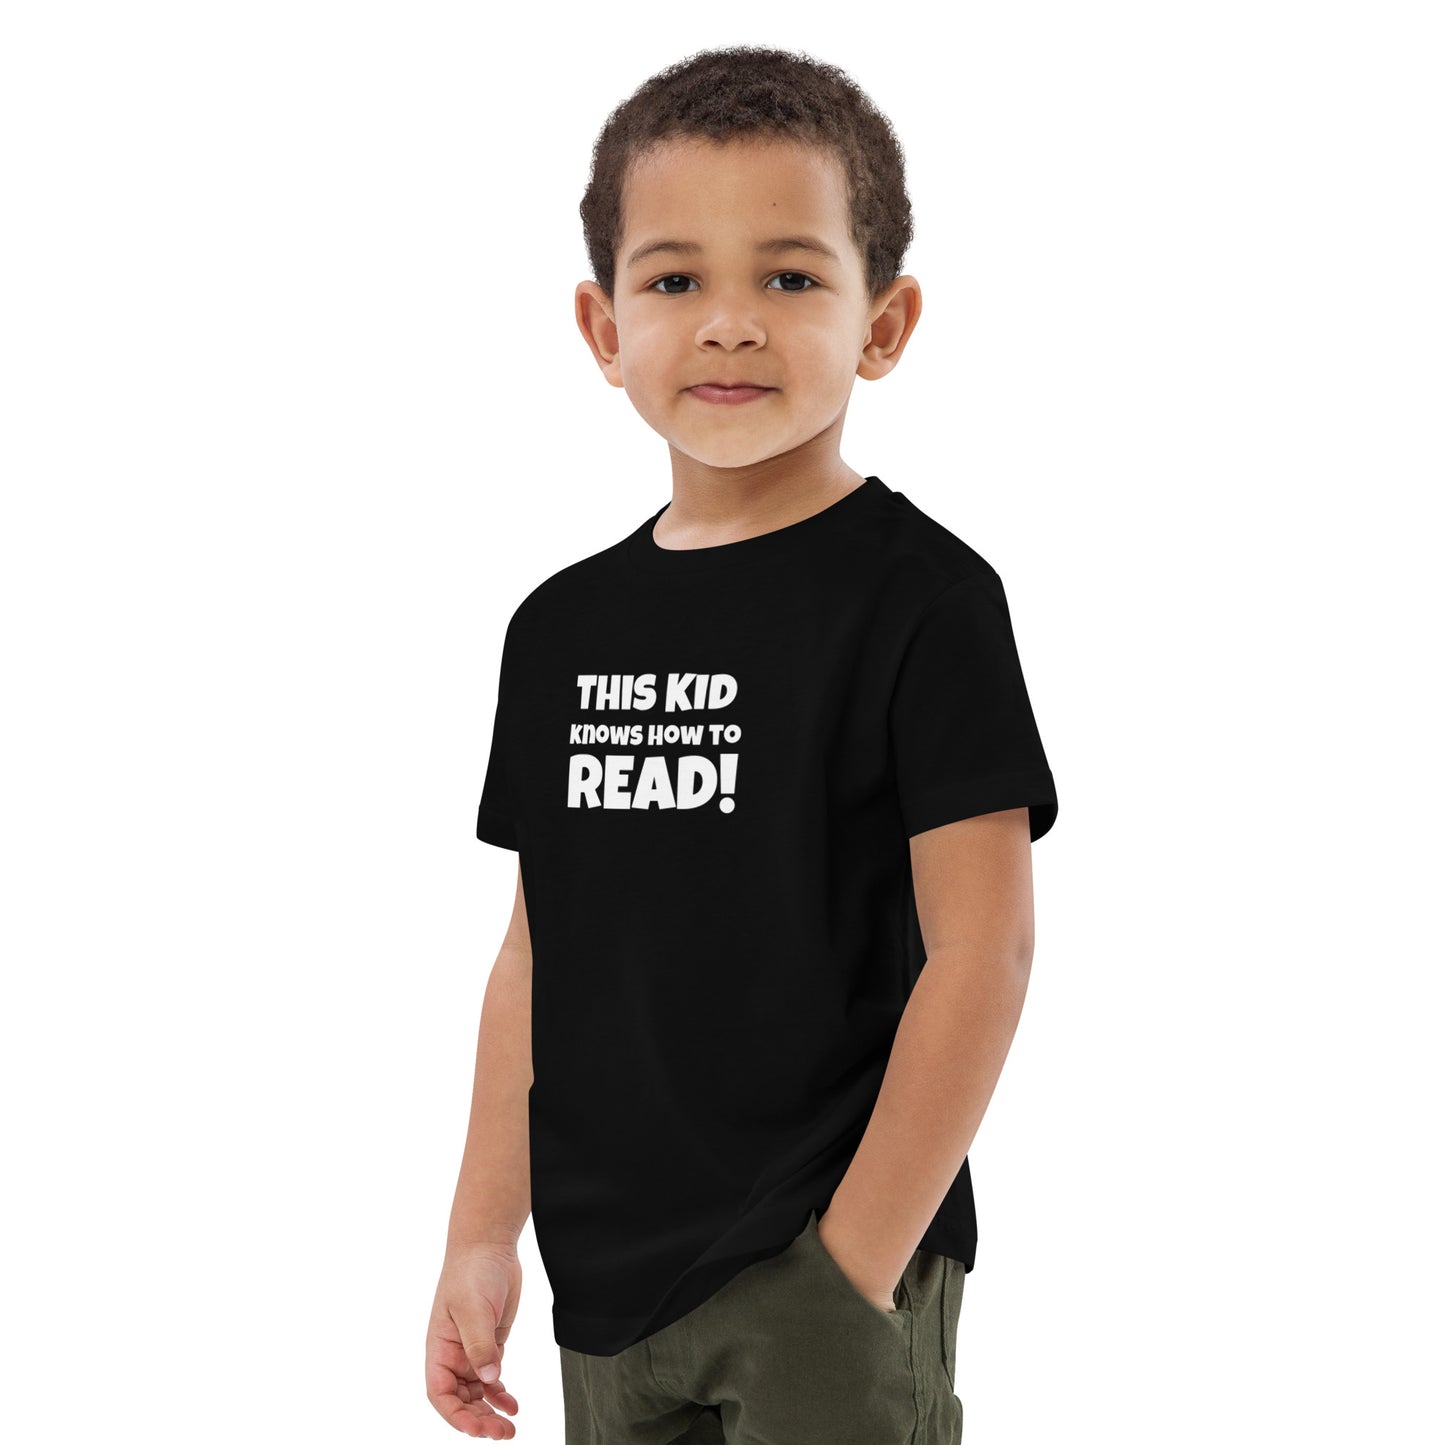 "This Kid knows how to Read!" Organic cotton kids Reading t-shirt